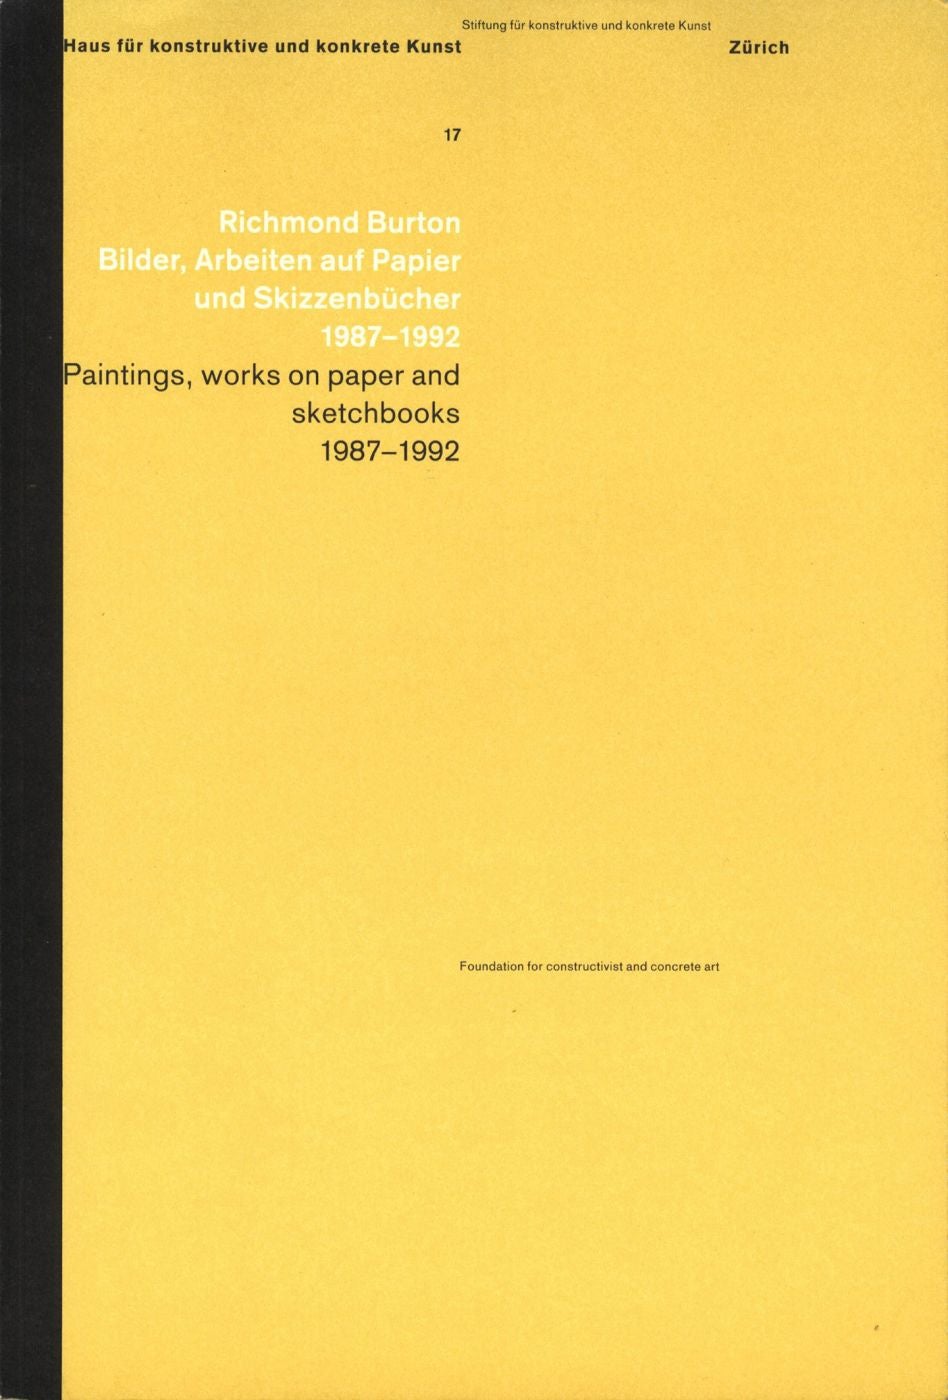 Richmond Burton: Paintings, Works on Paper and Sketchbooks 1987-1992